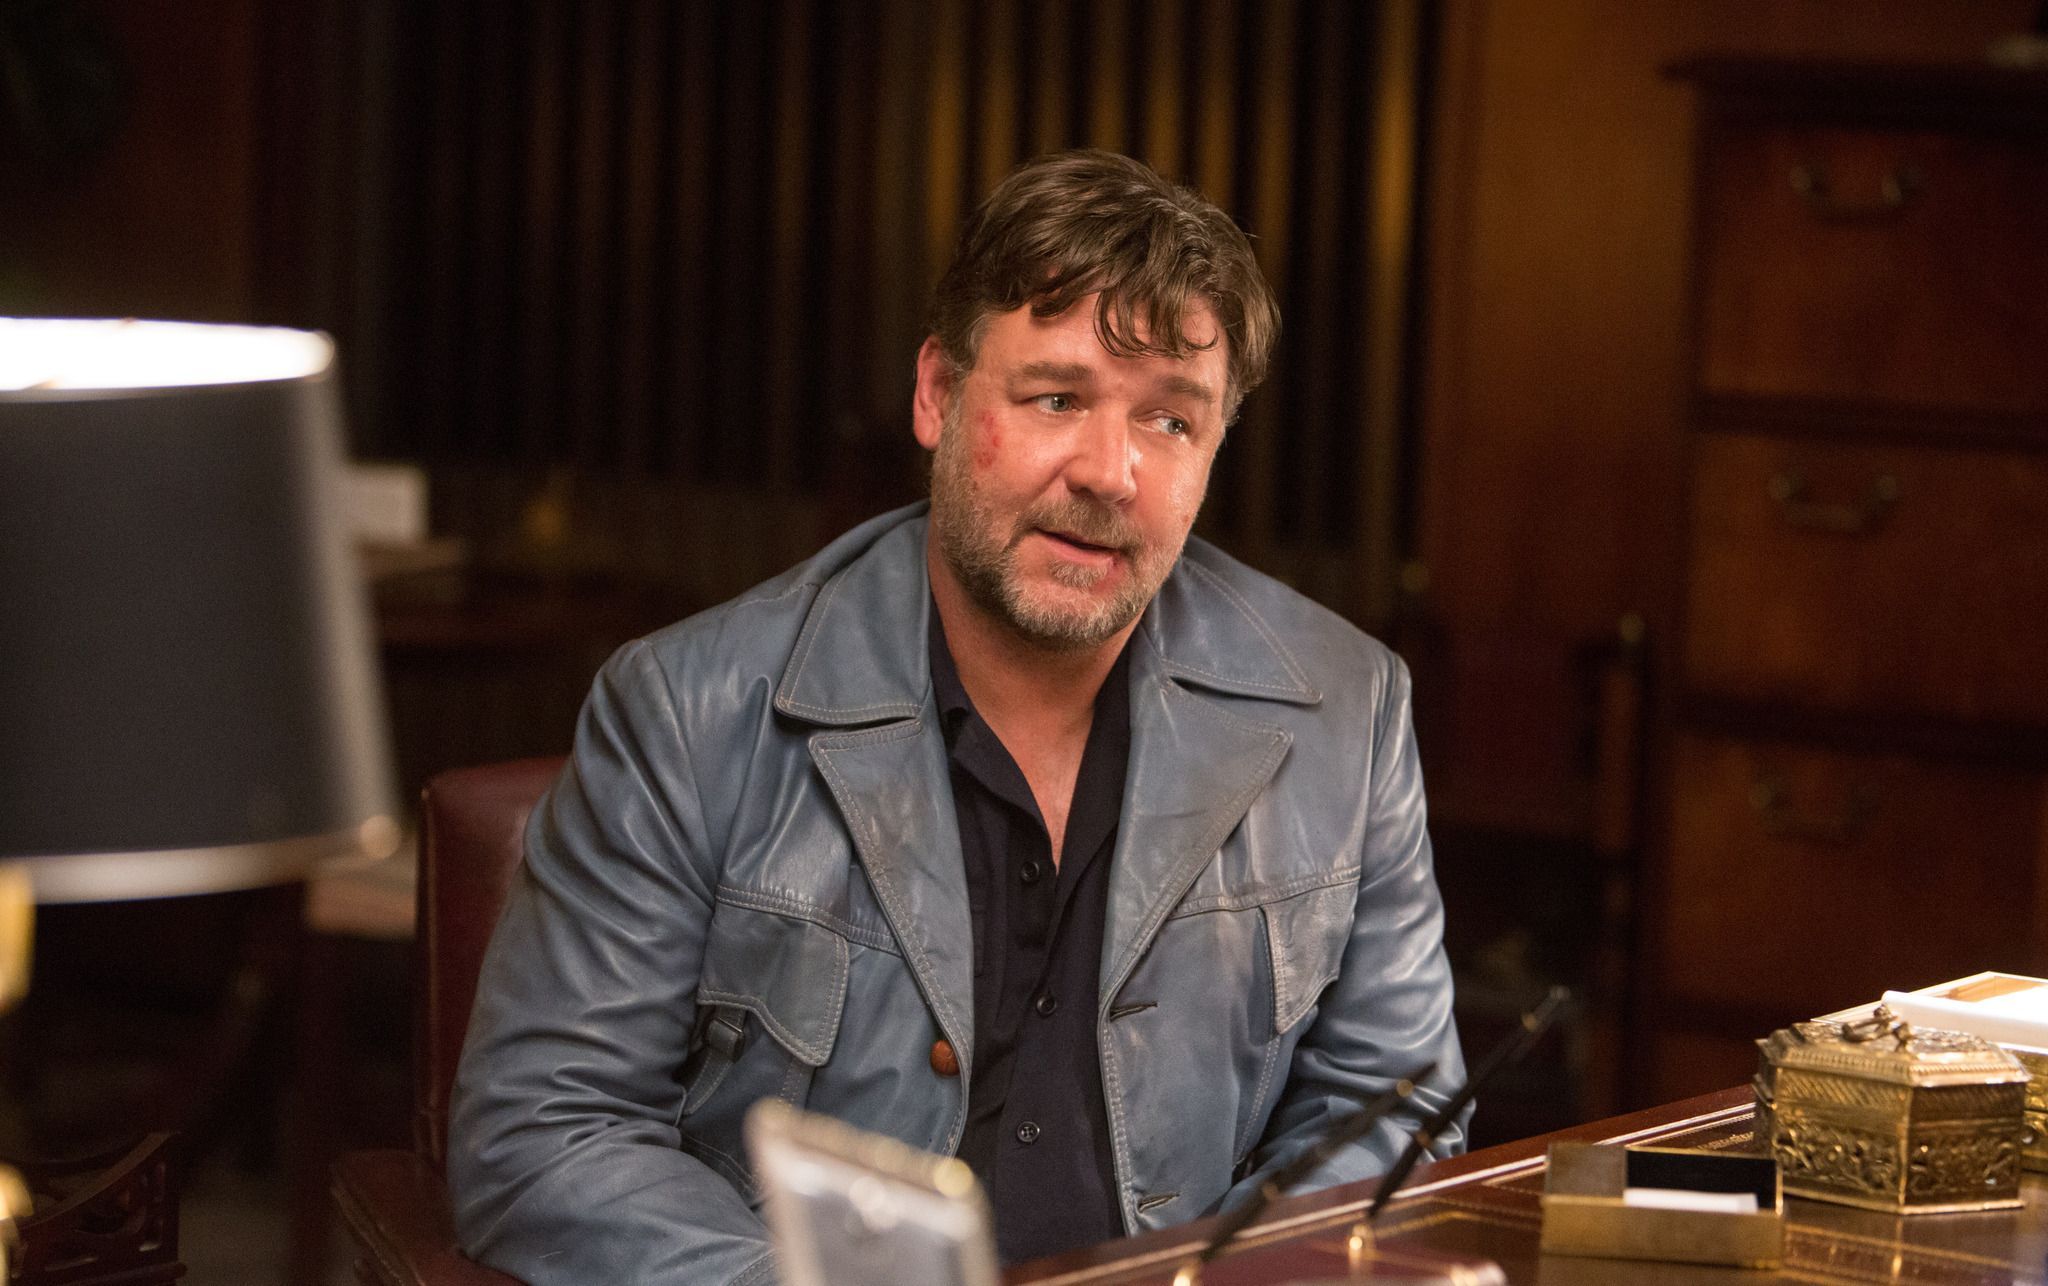 The Nice Guys Cast on Netflix - Russell Crowe as Jackson Healy